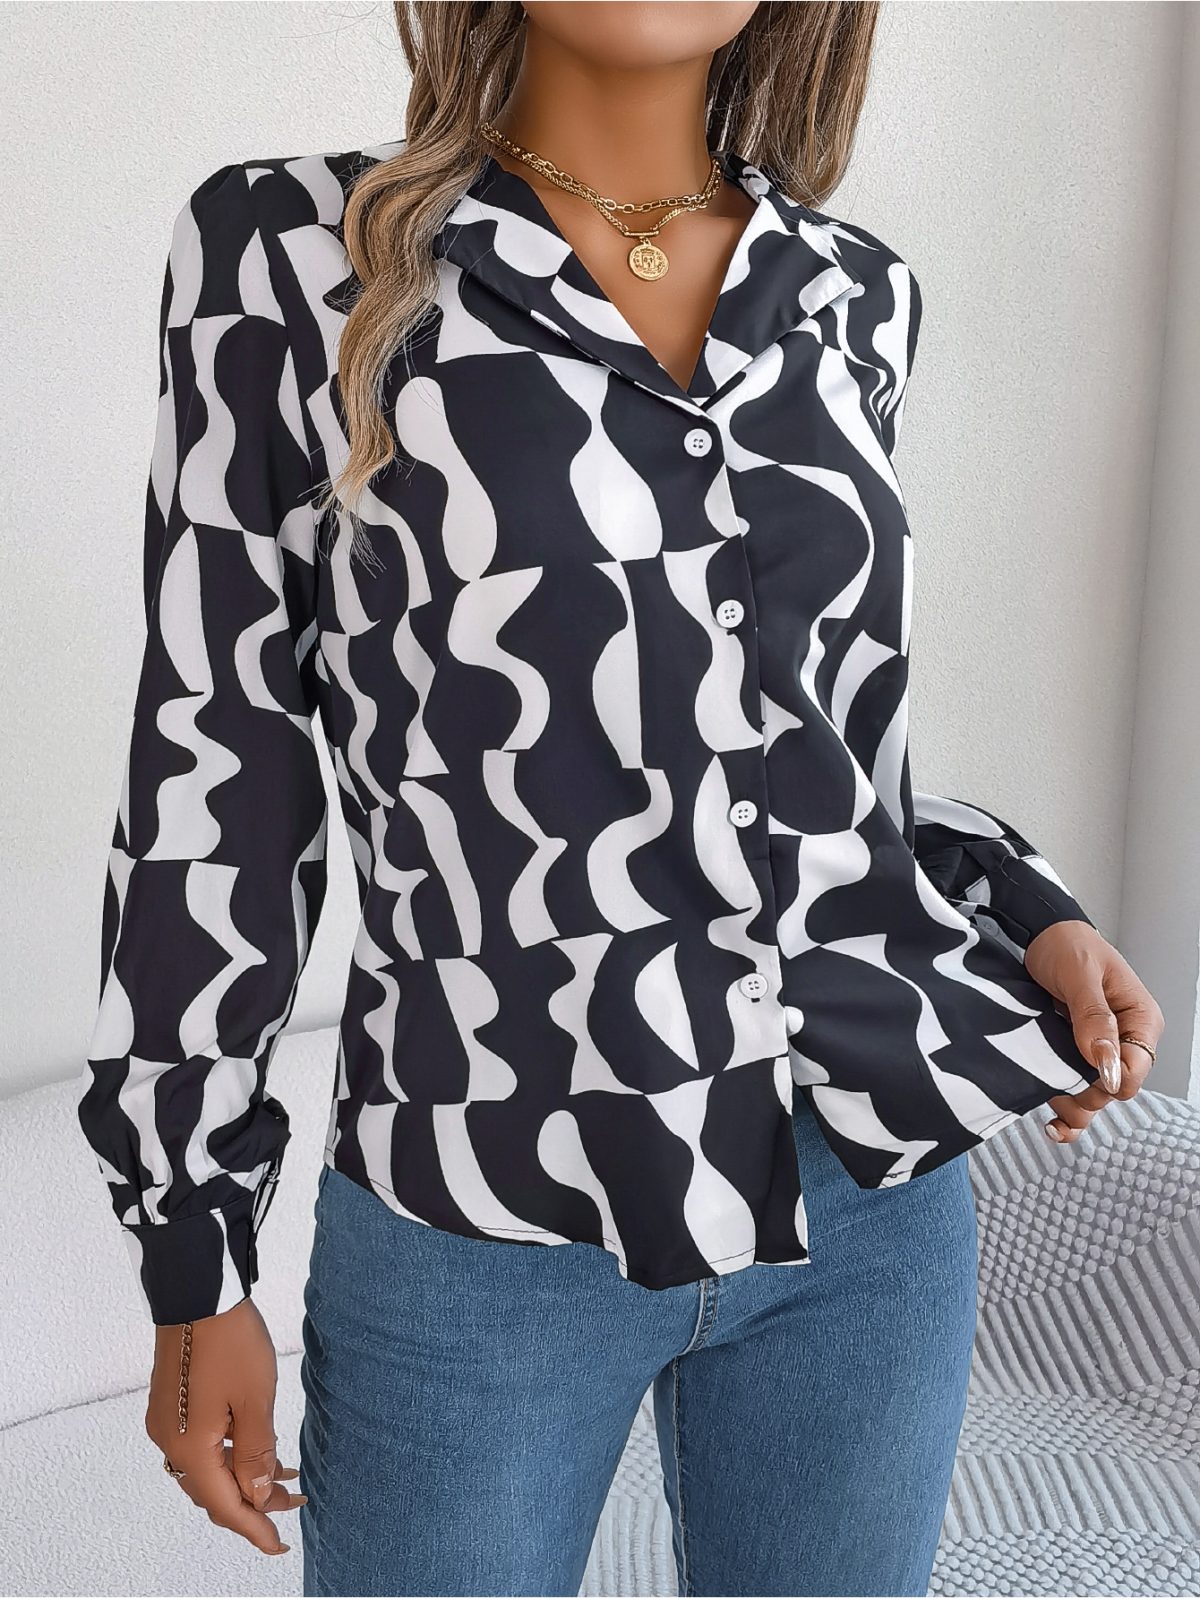 Commuting Elegant Contrast Color Striped Collar Long Sleeve Shirt in Blouses & Shirts